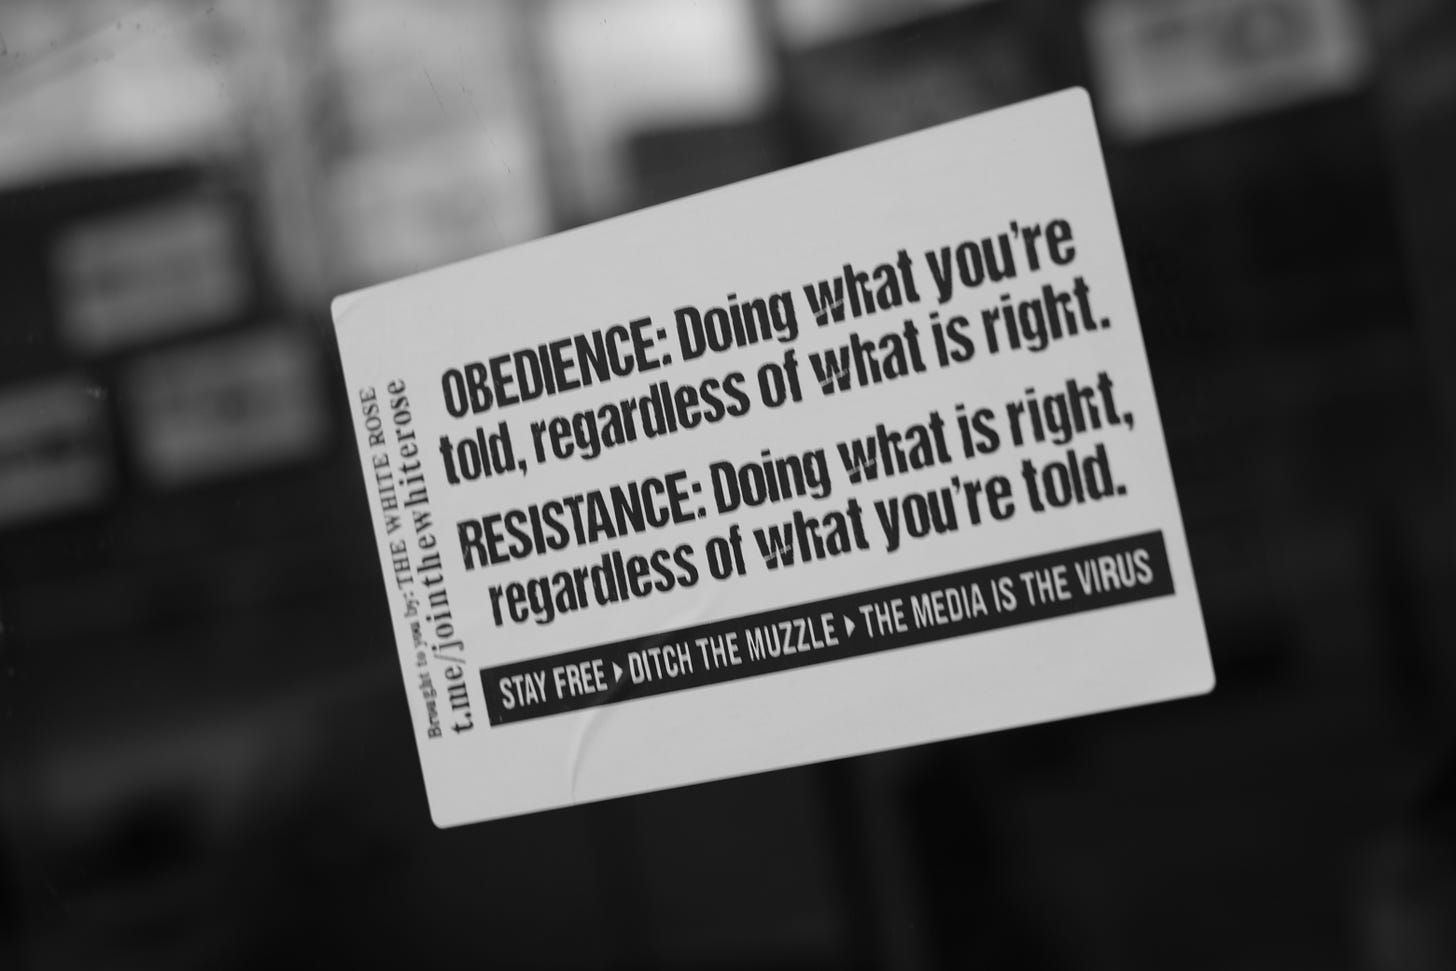 Obedience is doing what you're told regardless of what is right